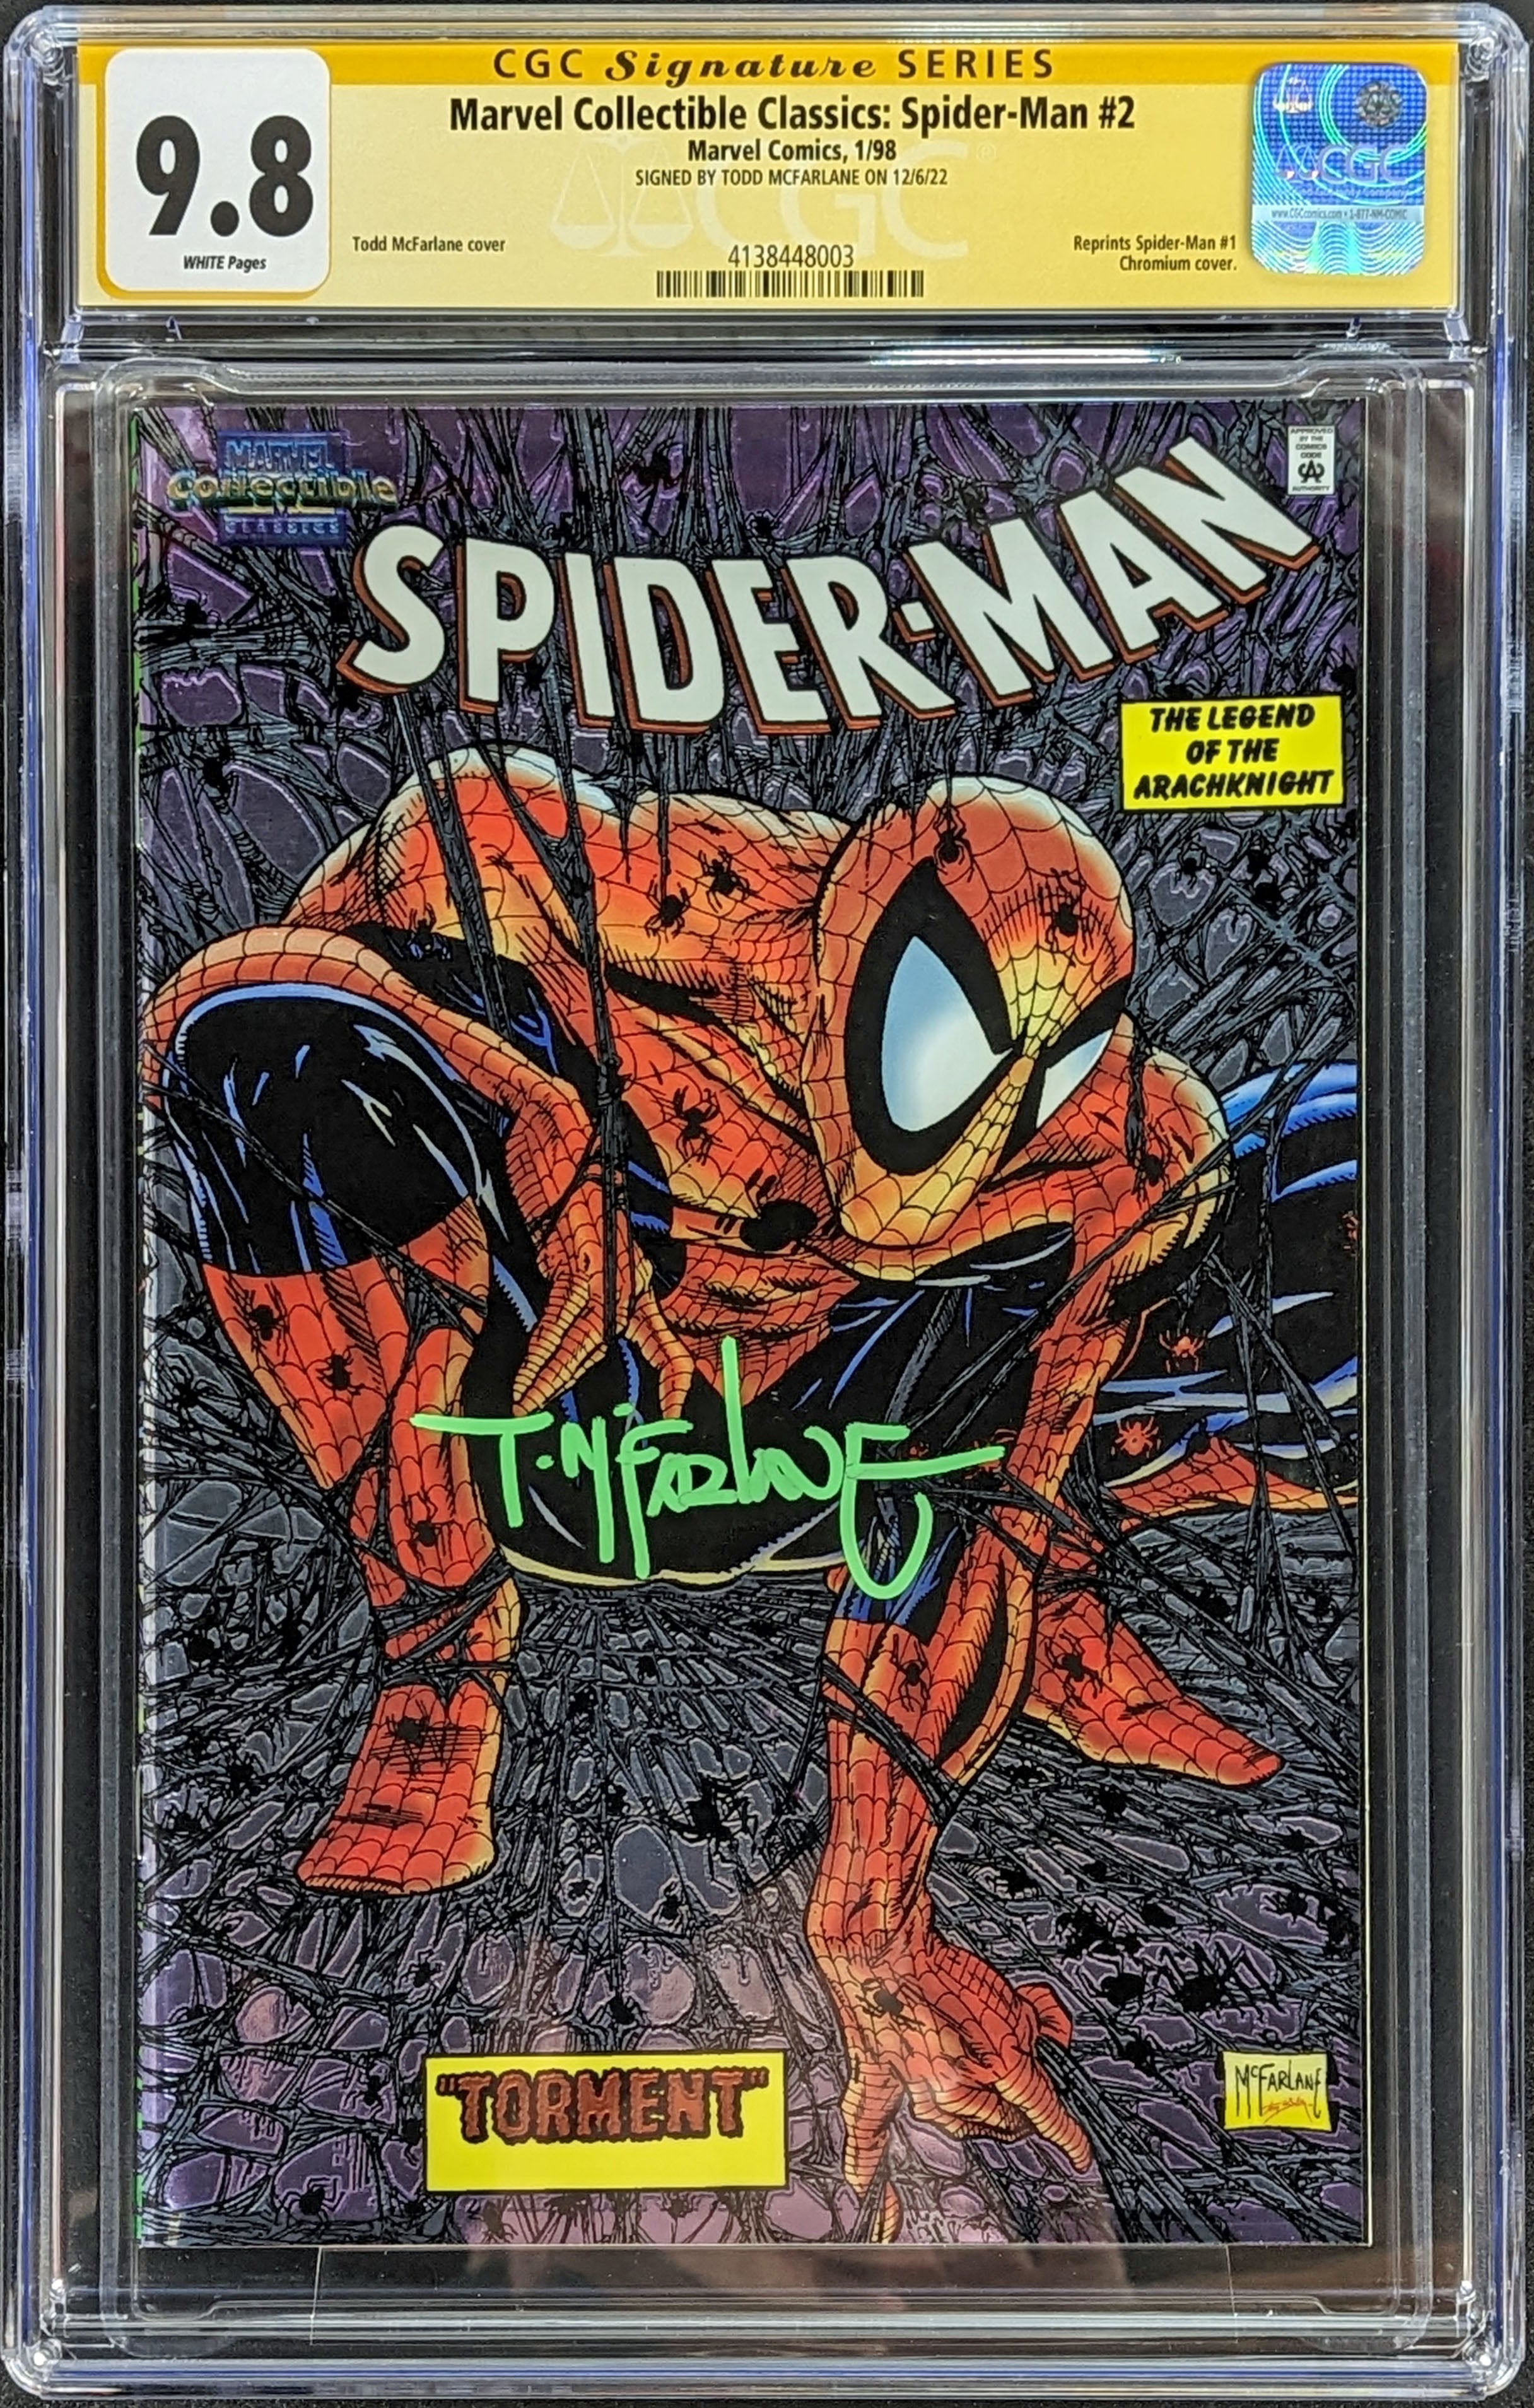 Marvel Collectible Classics Spider-Man #2 Signed Todd McFarlane Graded CGC 9.8